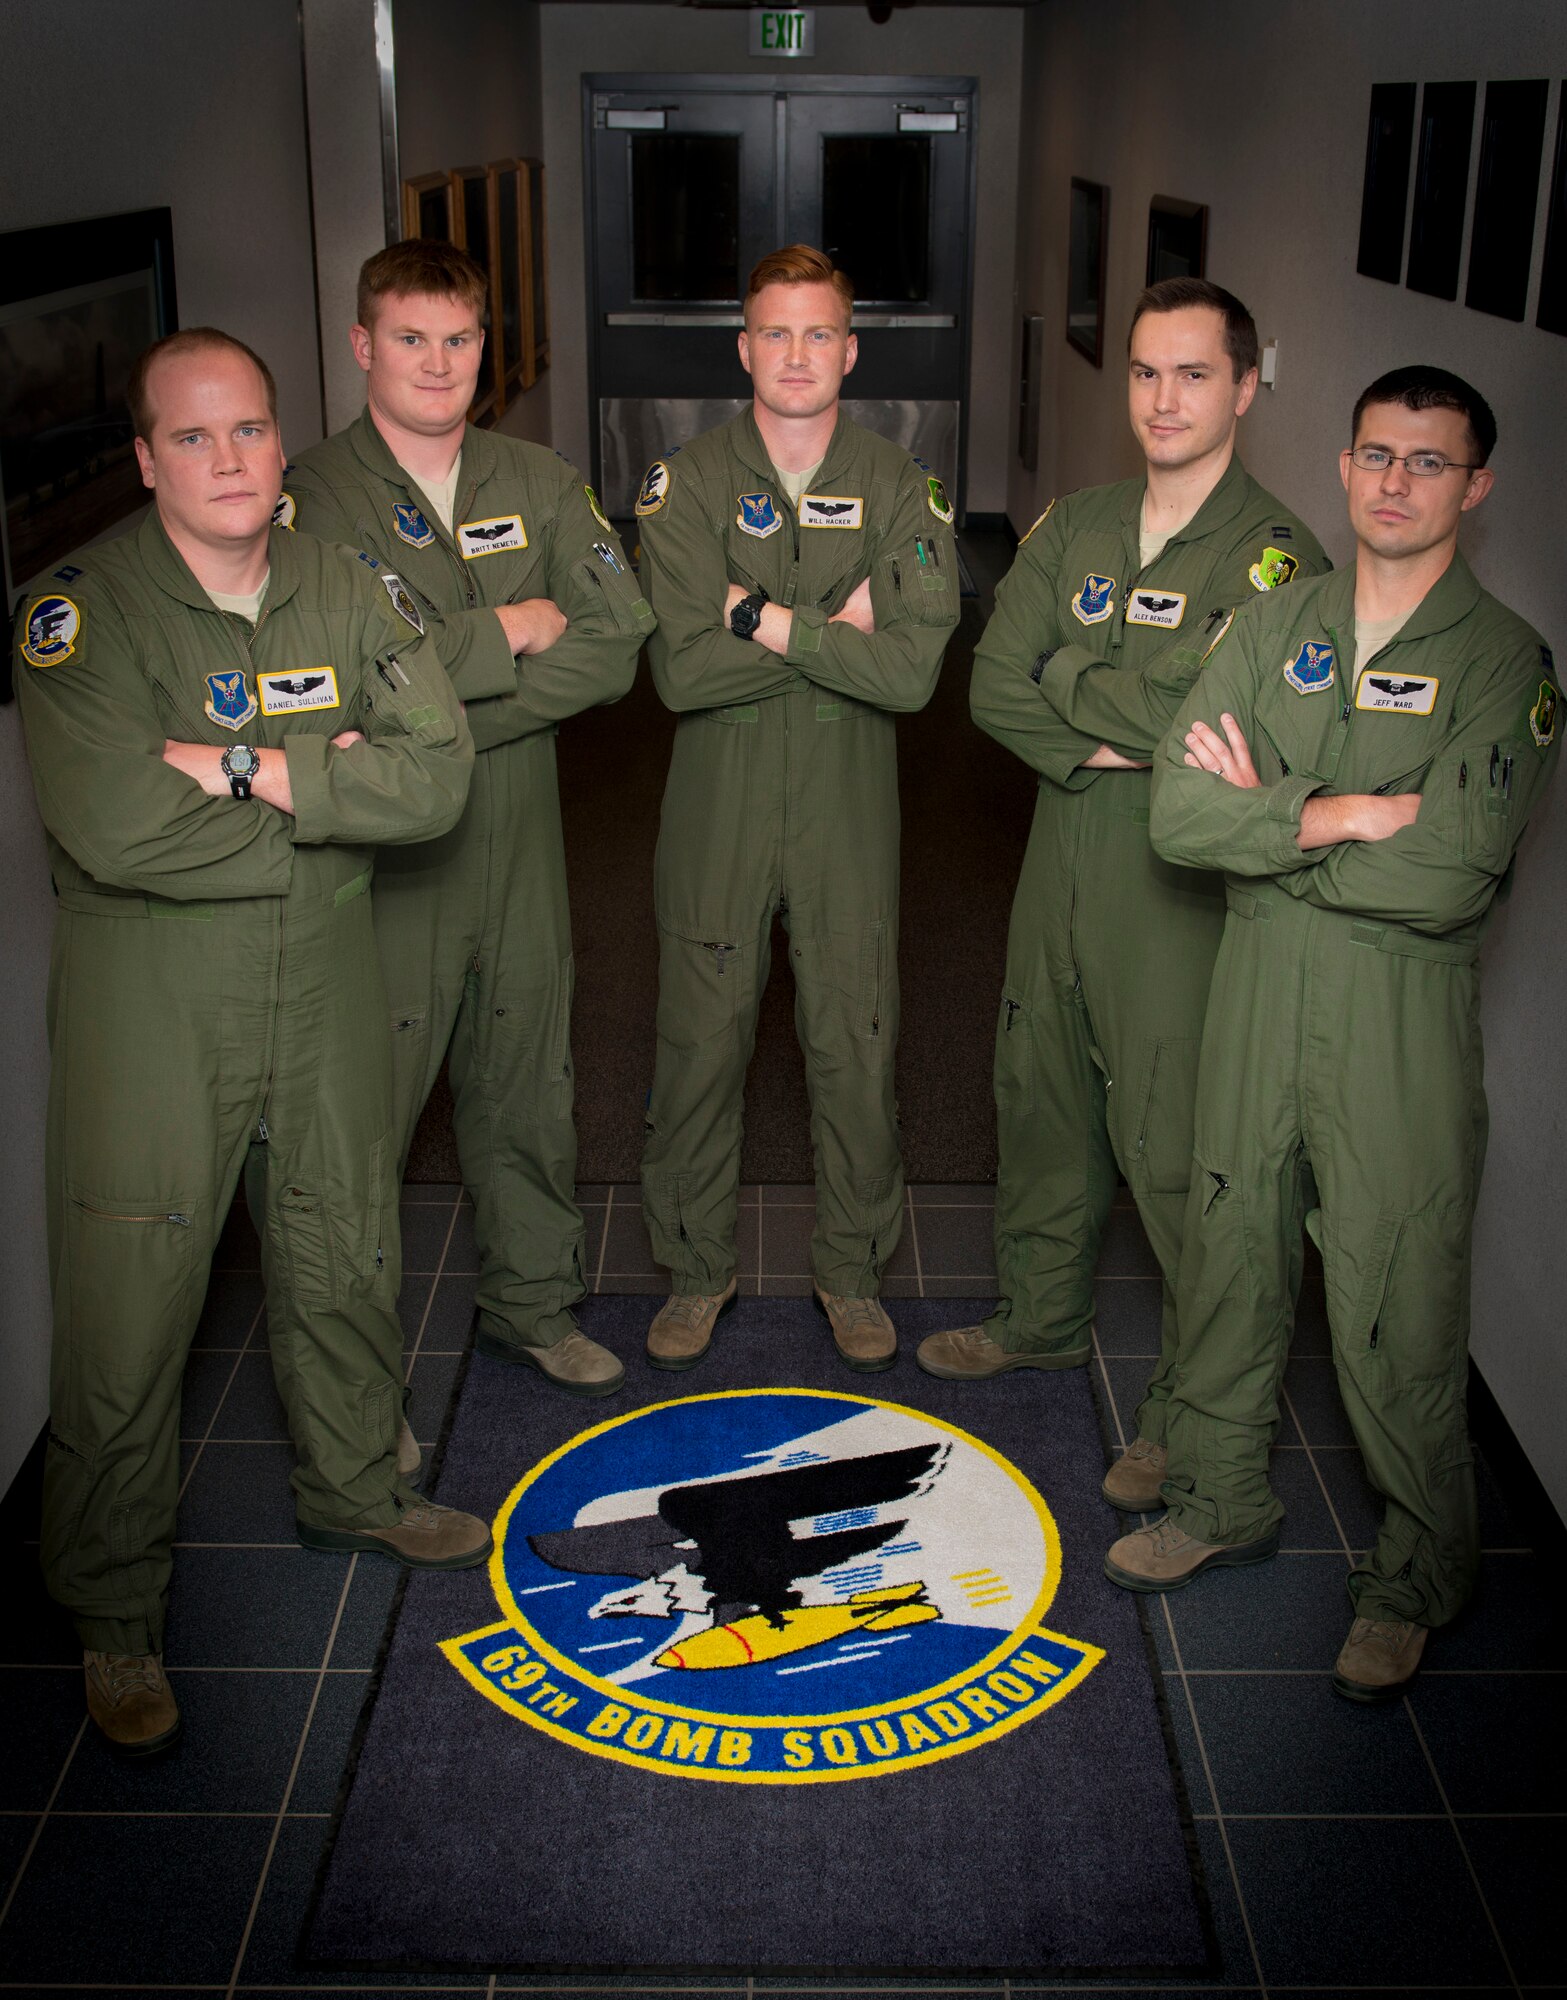 Members of the 69th Bomb Squadron’s Air Force Global Strike Challenge team pose for a group photo at Minot Air Force Base, N.D., Sept. 9, 2014. Their portion of the GSC consists of competing against other bomb squadrons to see who can most accurately drop bombs on target. (U.S. Air Force photo/Airman 1st Class Sahara L. Fales)